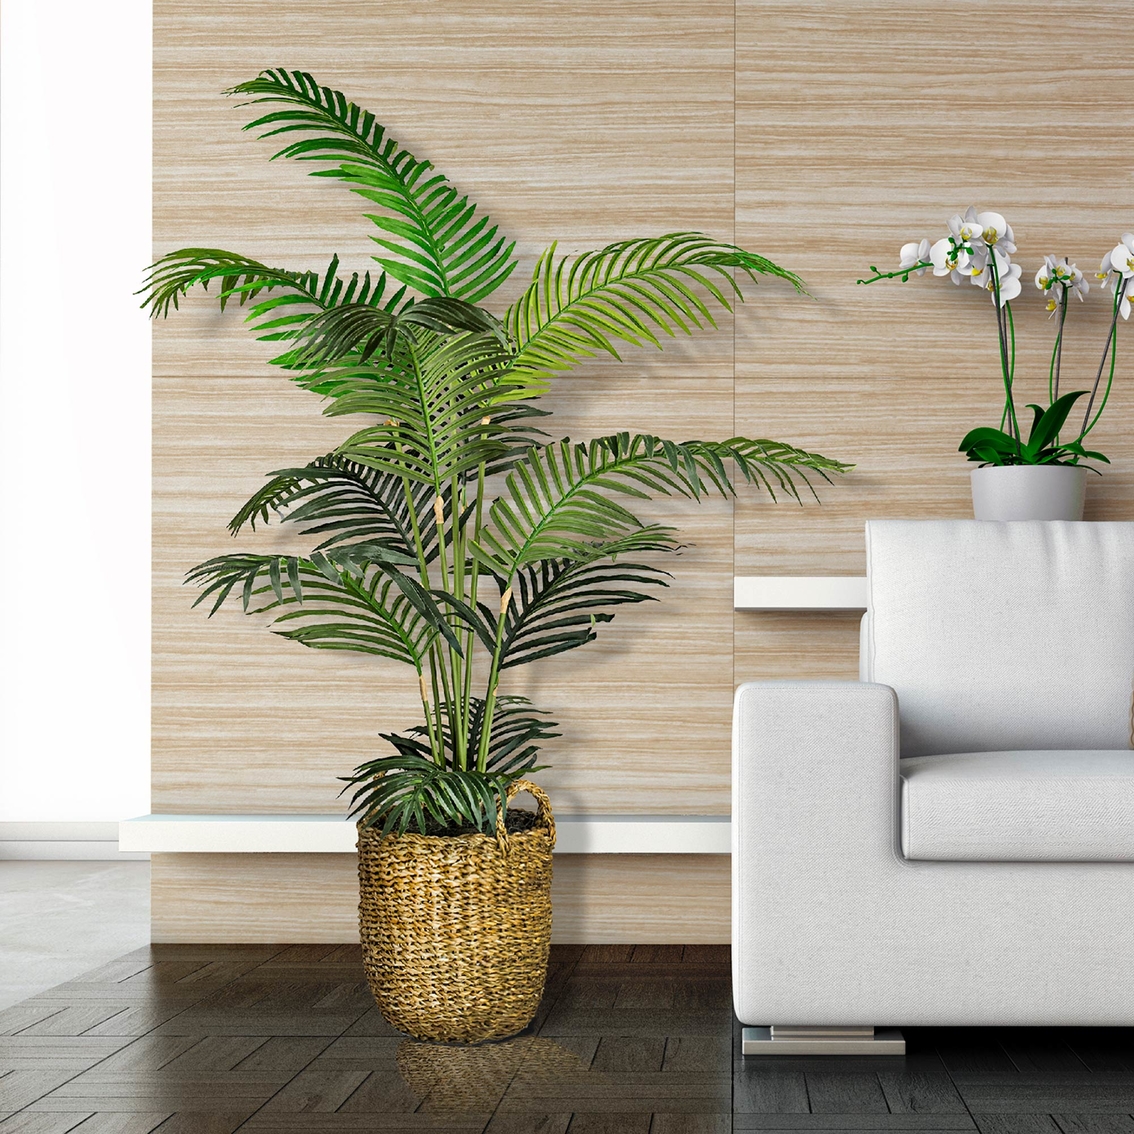 LCG Florals Areca Palm Tree in Basket - Image 2 of 2